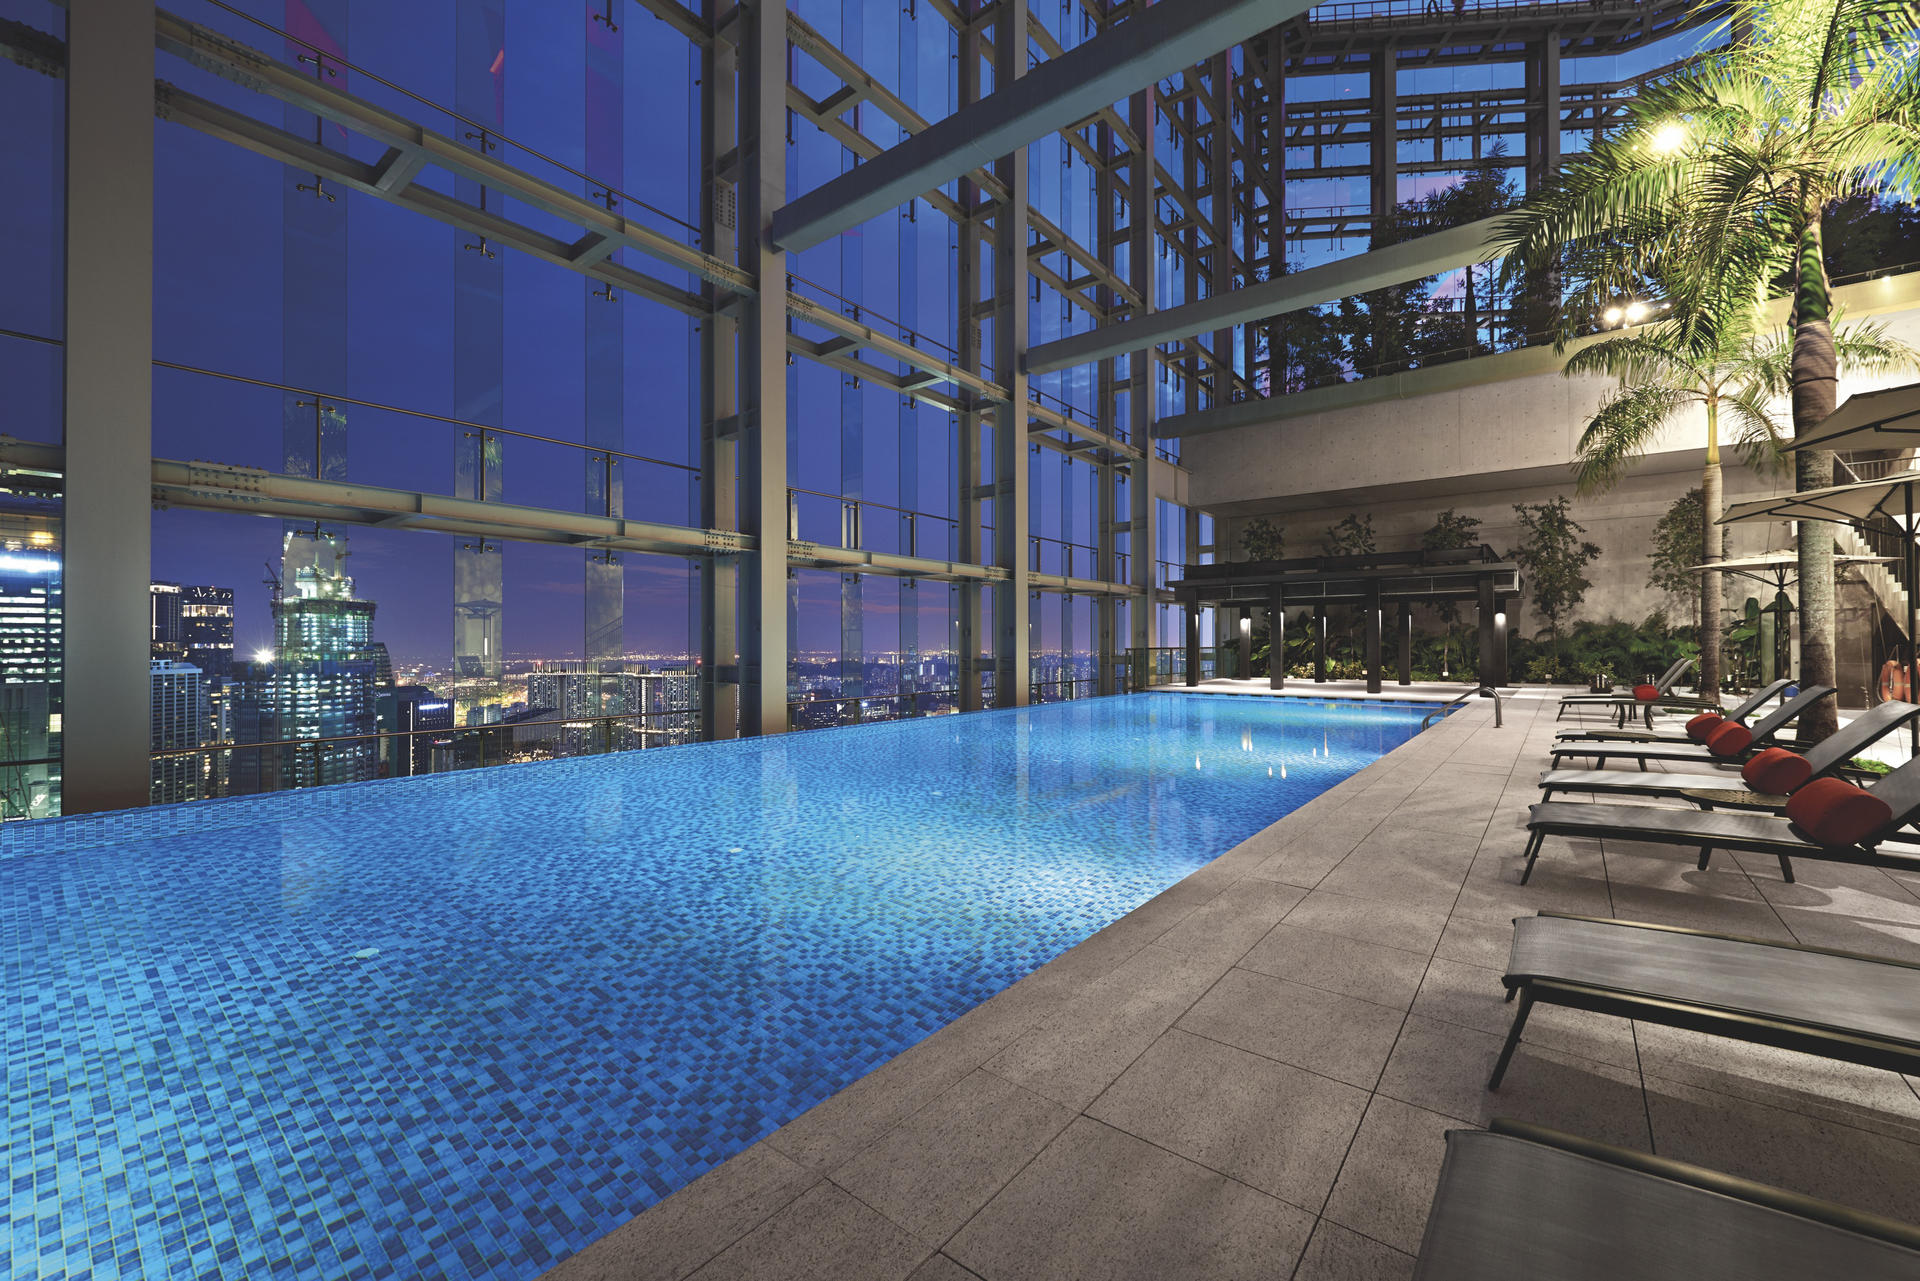 The pool at Singapore's Gravity fitness club.